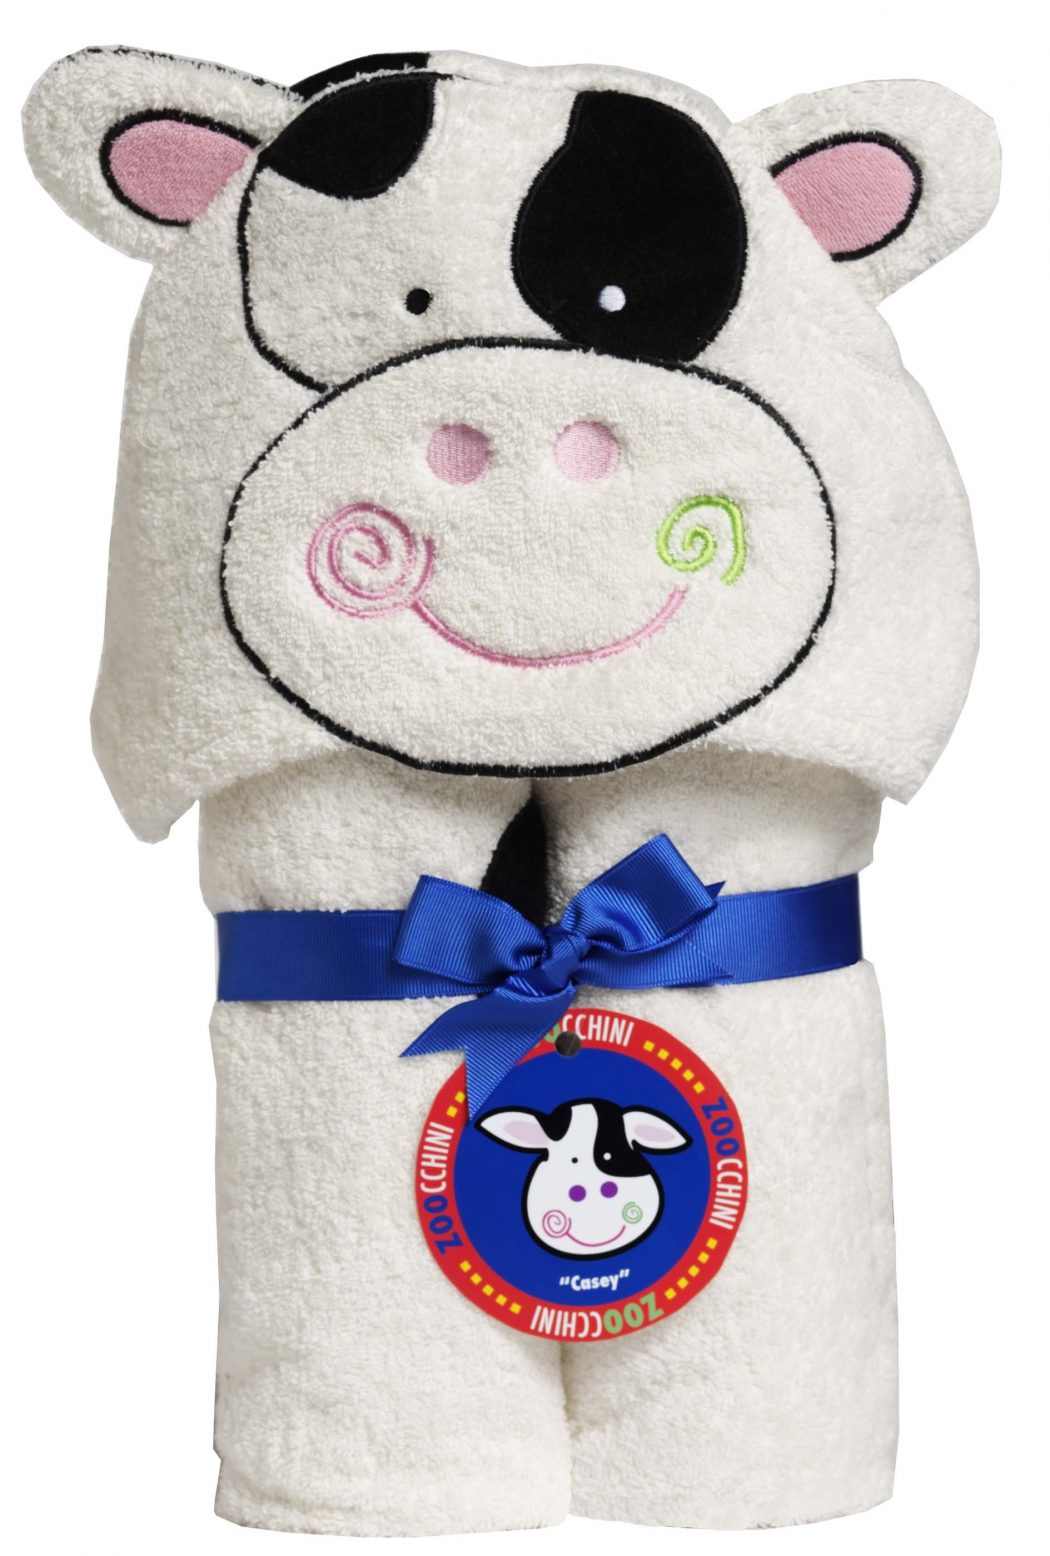 zoocchini-hooded-towel-casey-the-cow-128-p Best 25 Baby Shower Gifts